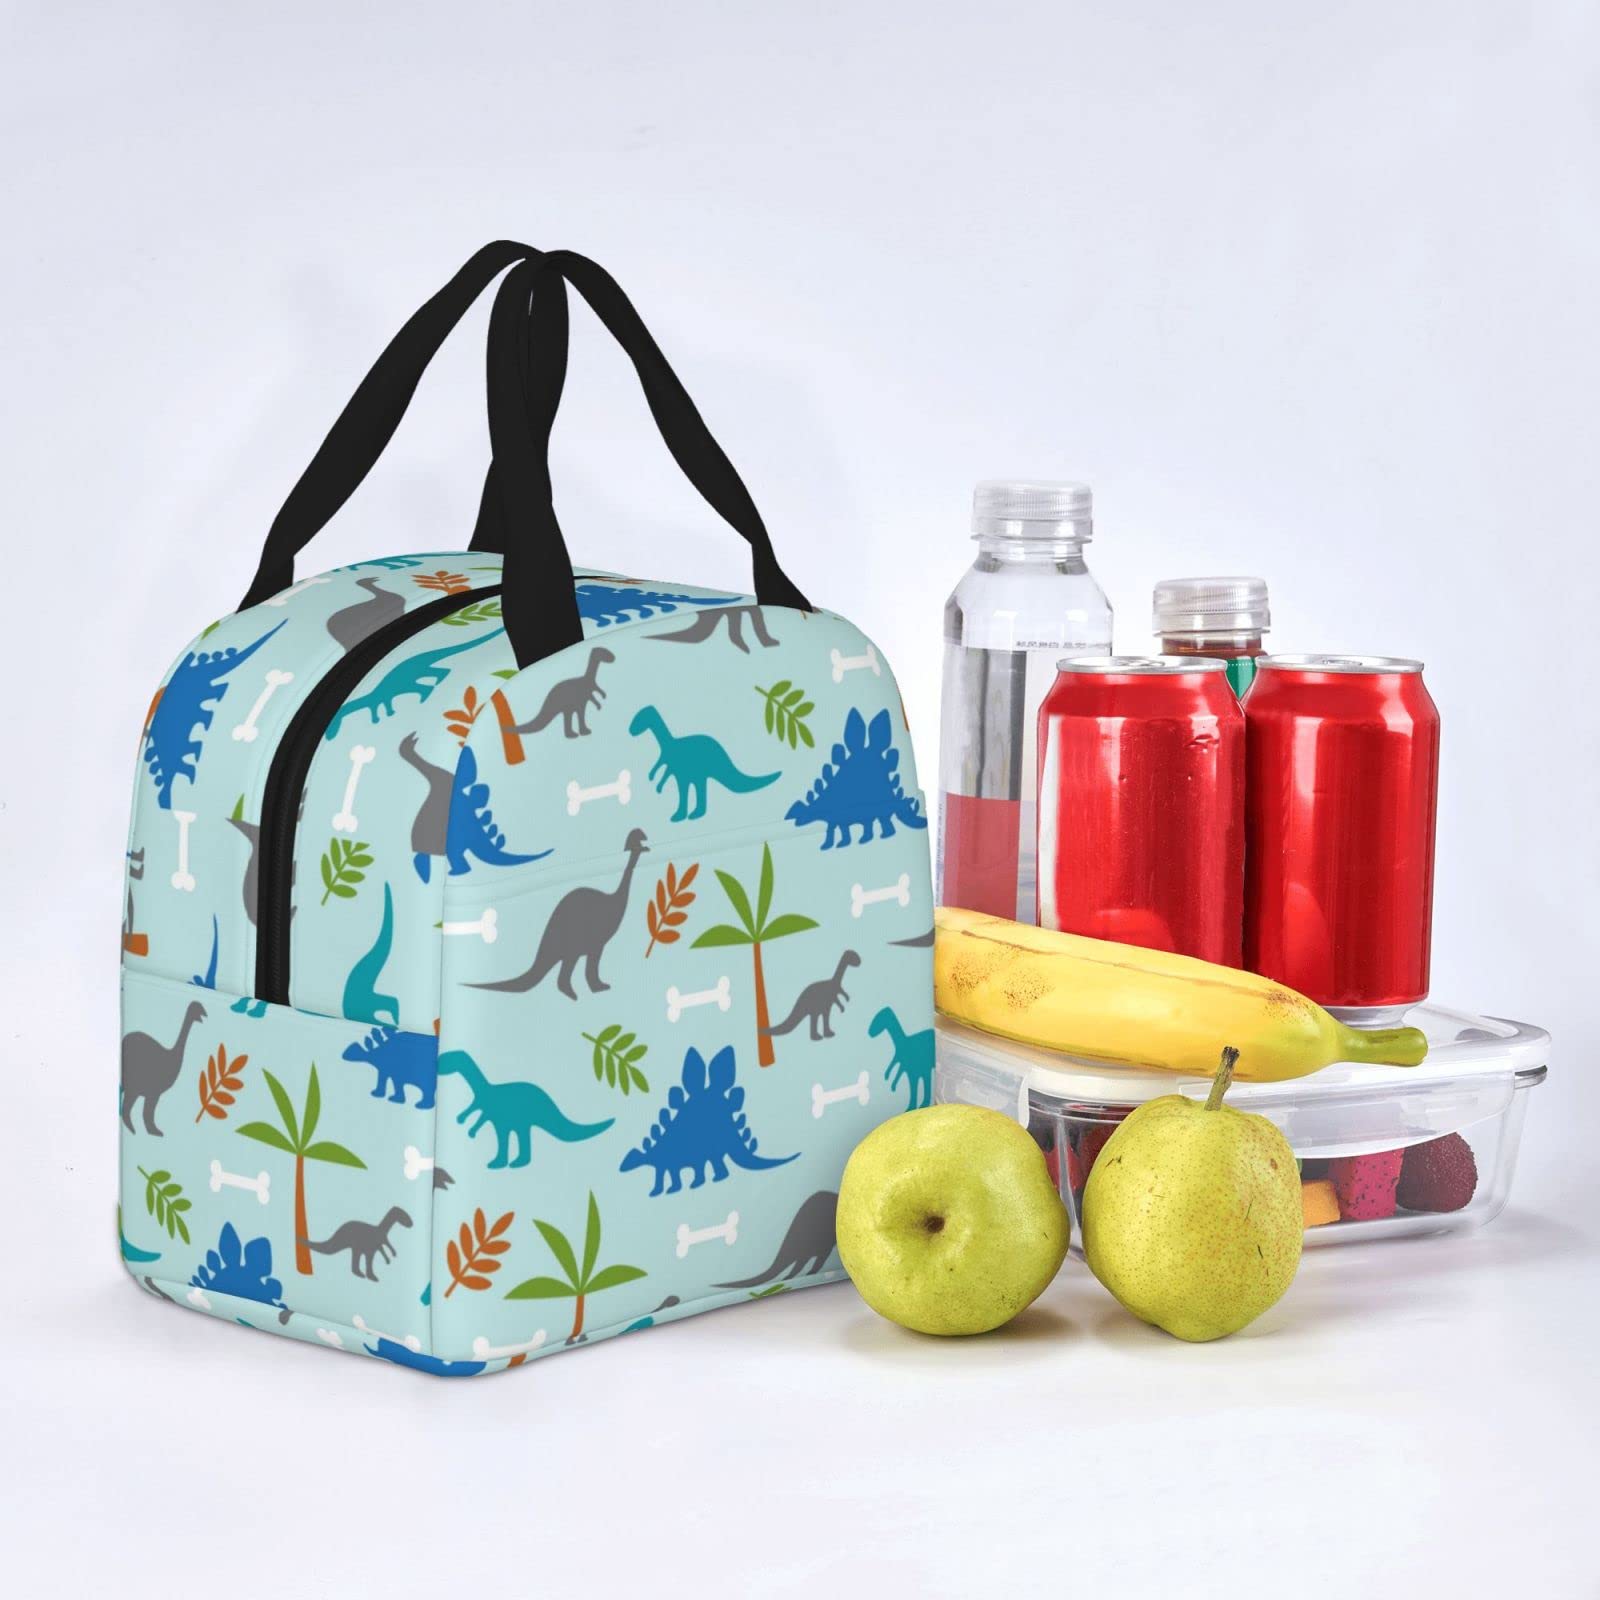 IOFNG Blue Cartoon Dinosaur Lunch Bag Men's Leakproof Cooler Lunch Box Portable Lunch Box for Work Picnic Camping